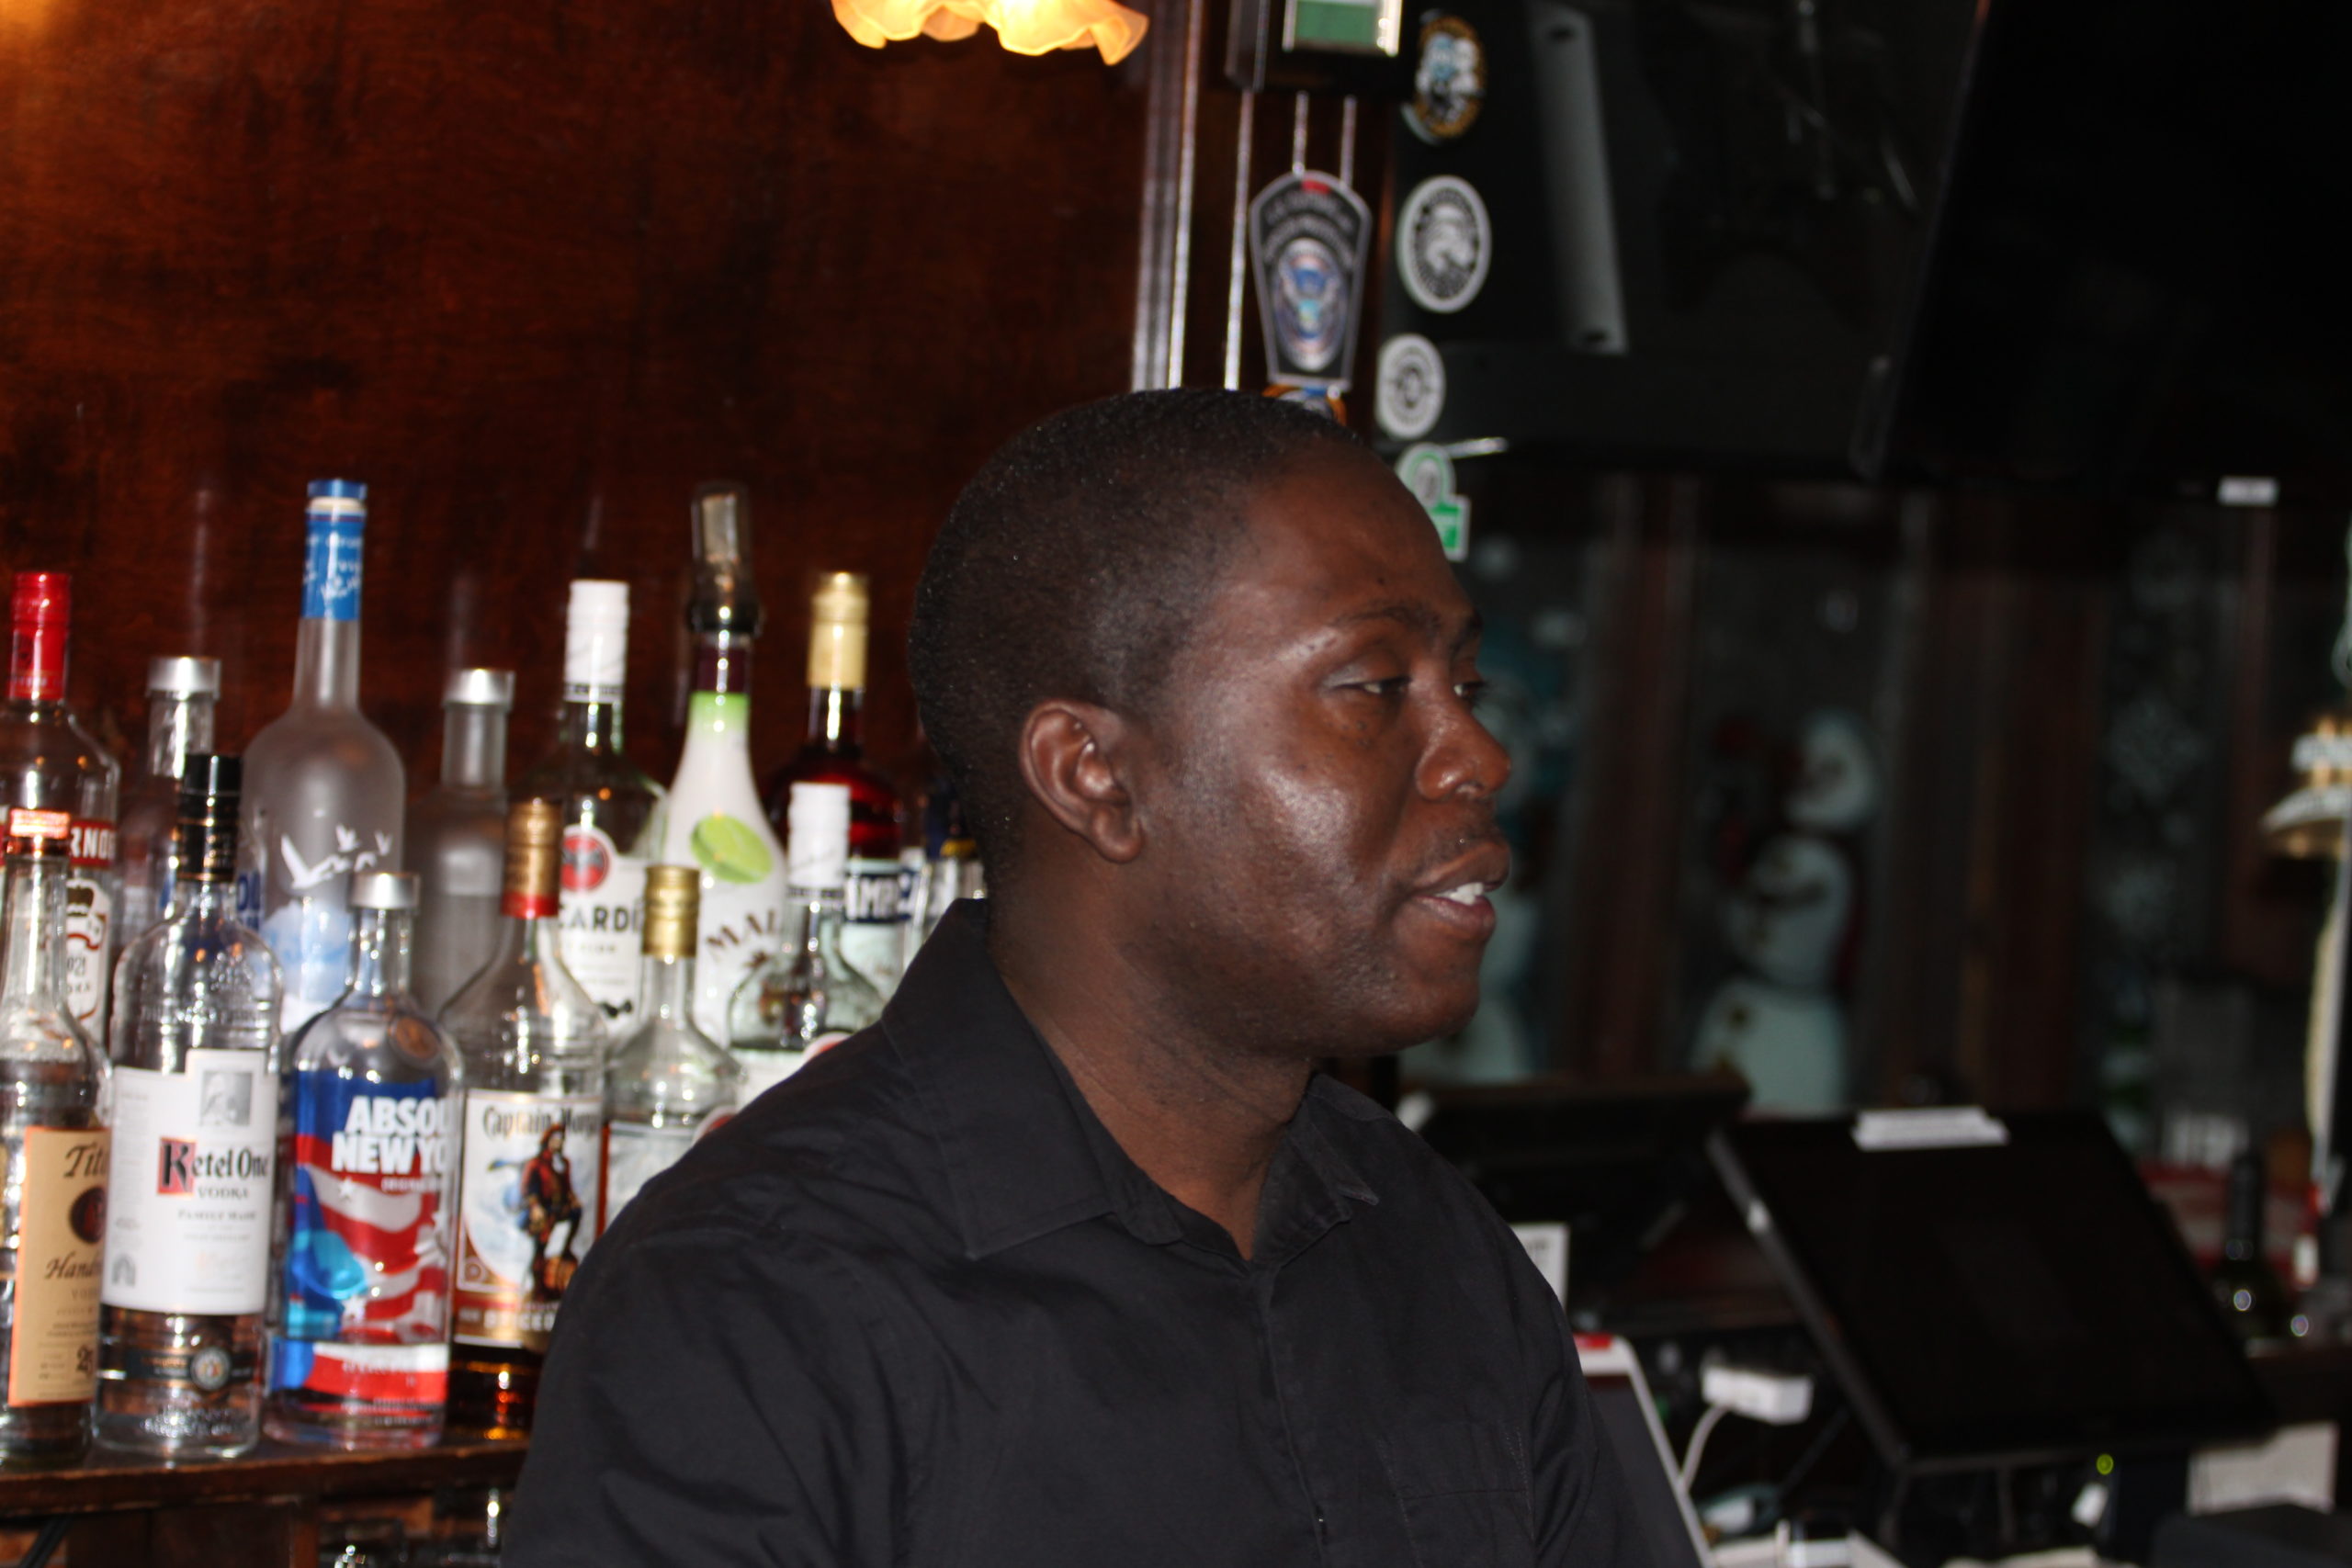 Owner Loycent Gordon shares his vision for future of Neir’s Tavern